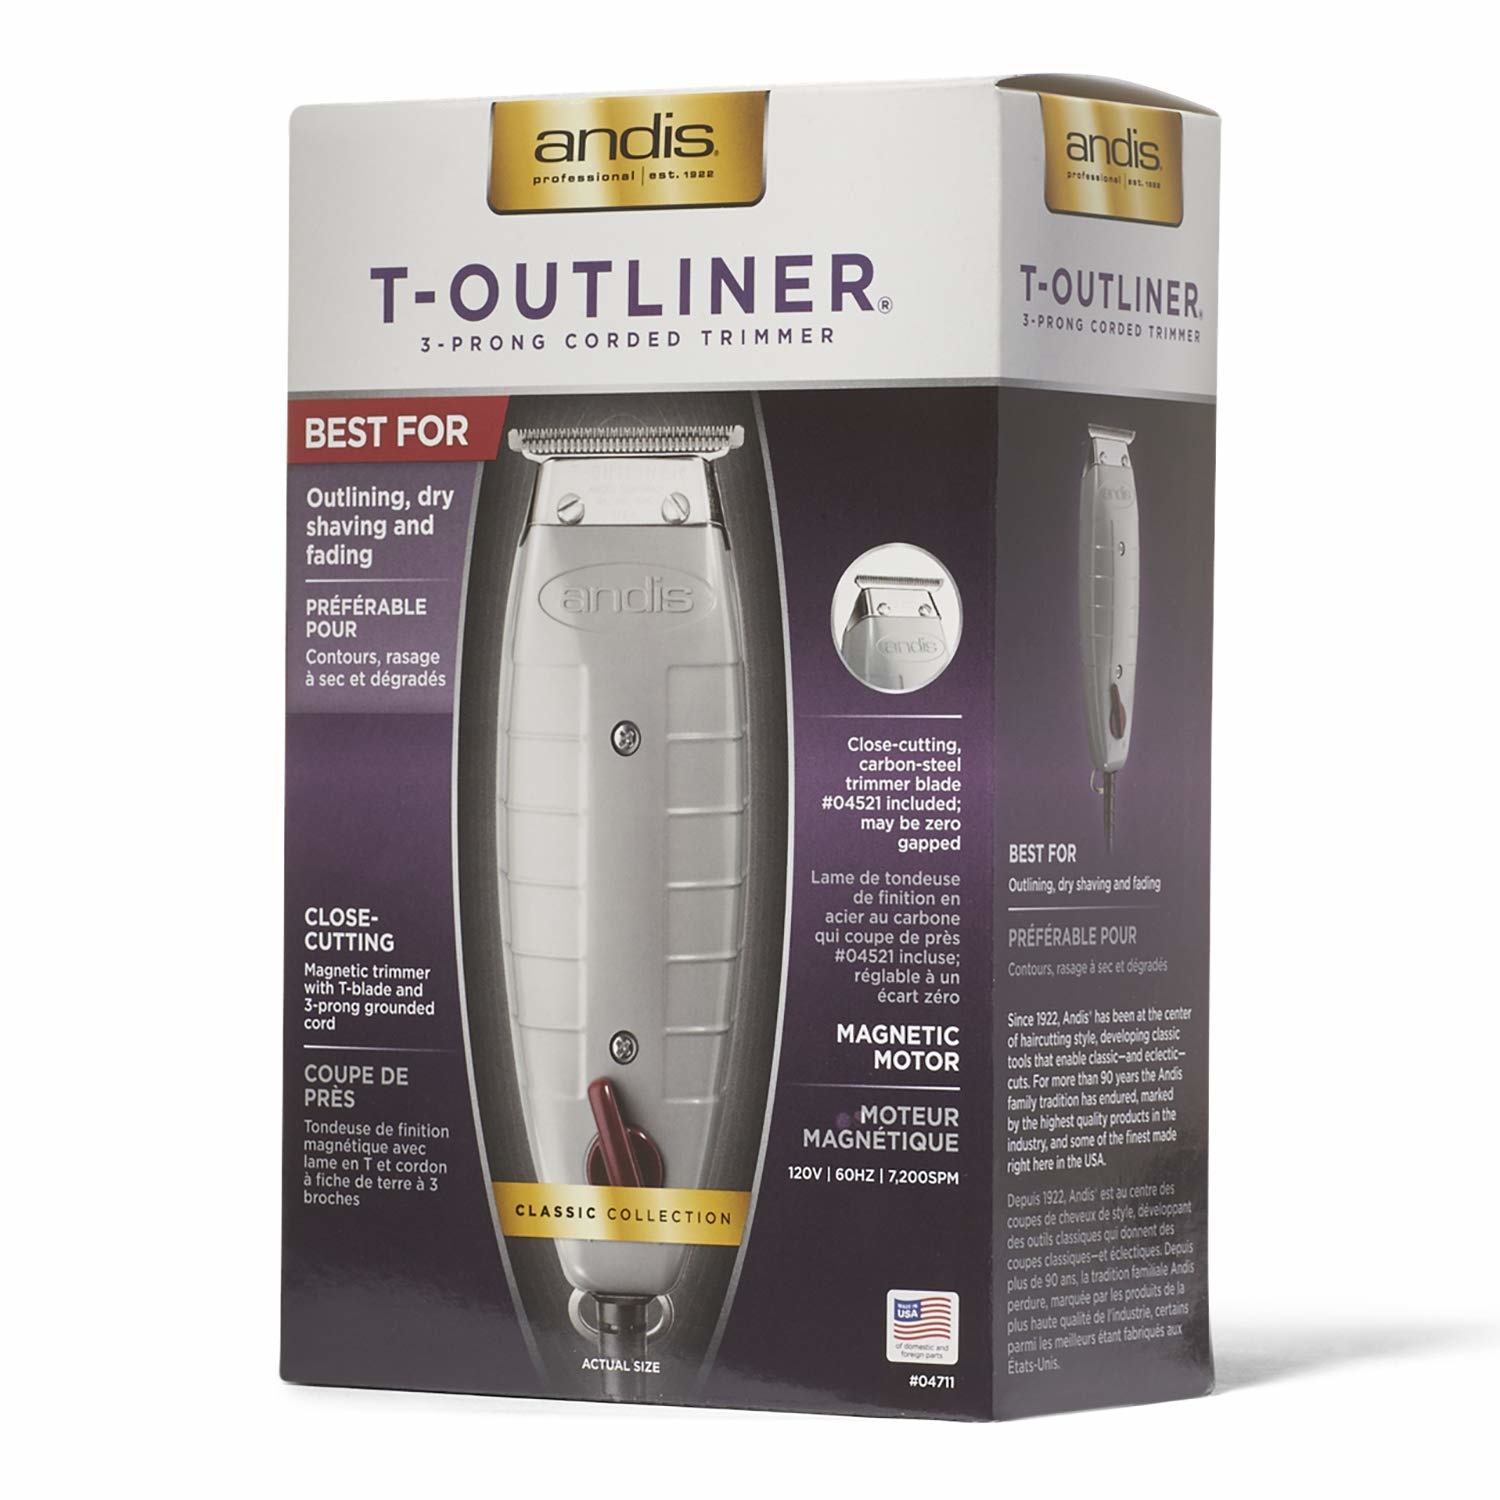 CLASSIC COLLECTION T-Outliner Trimmer